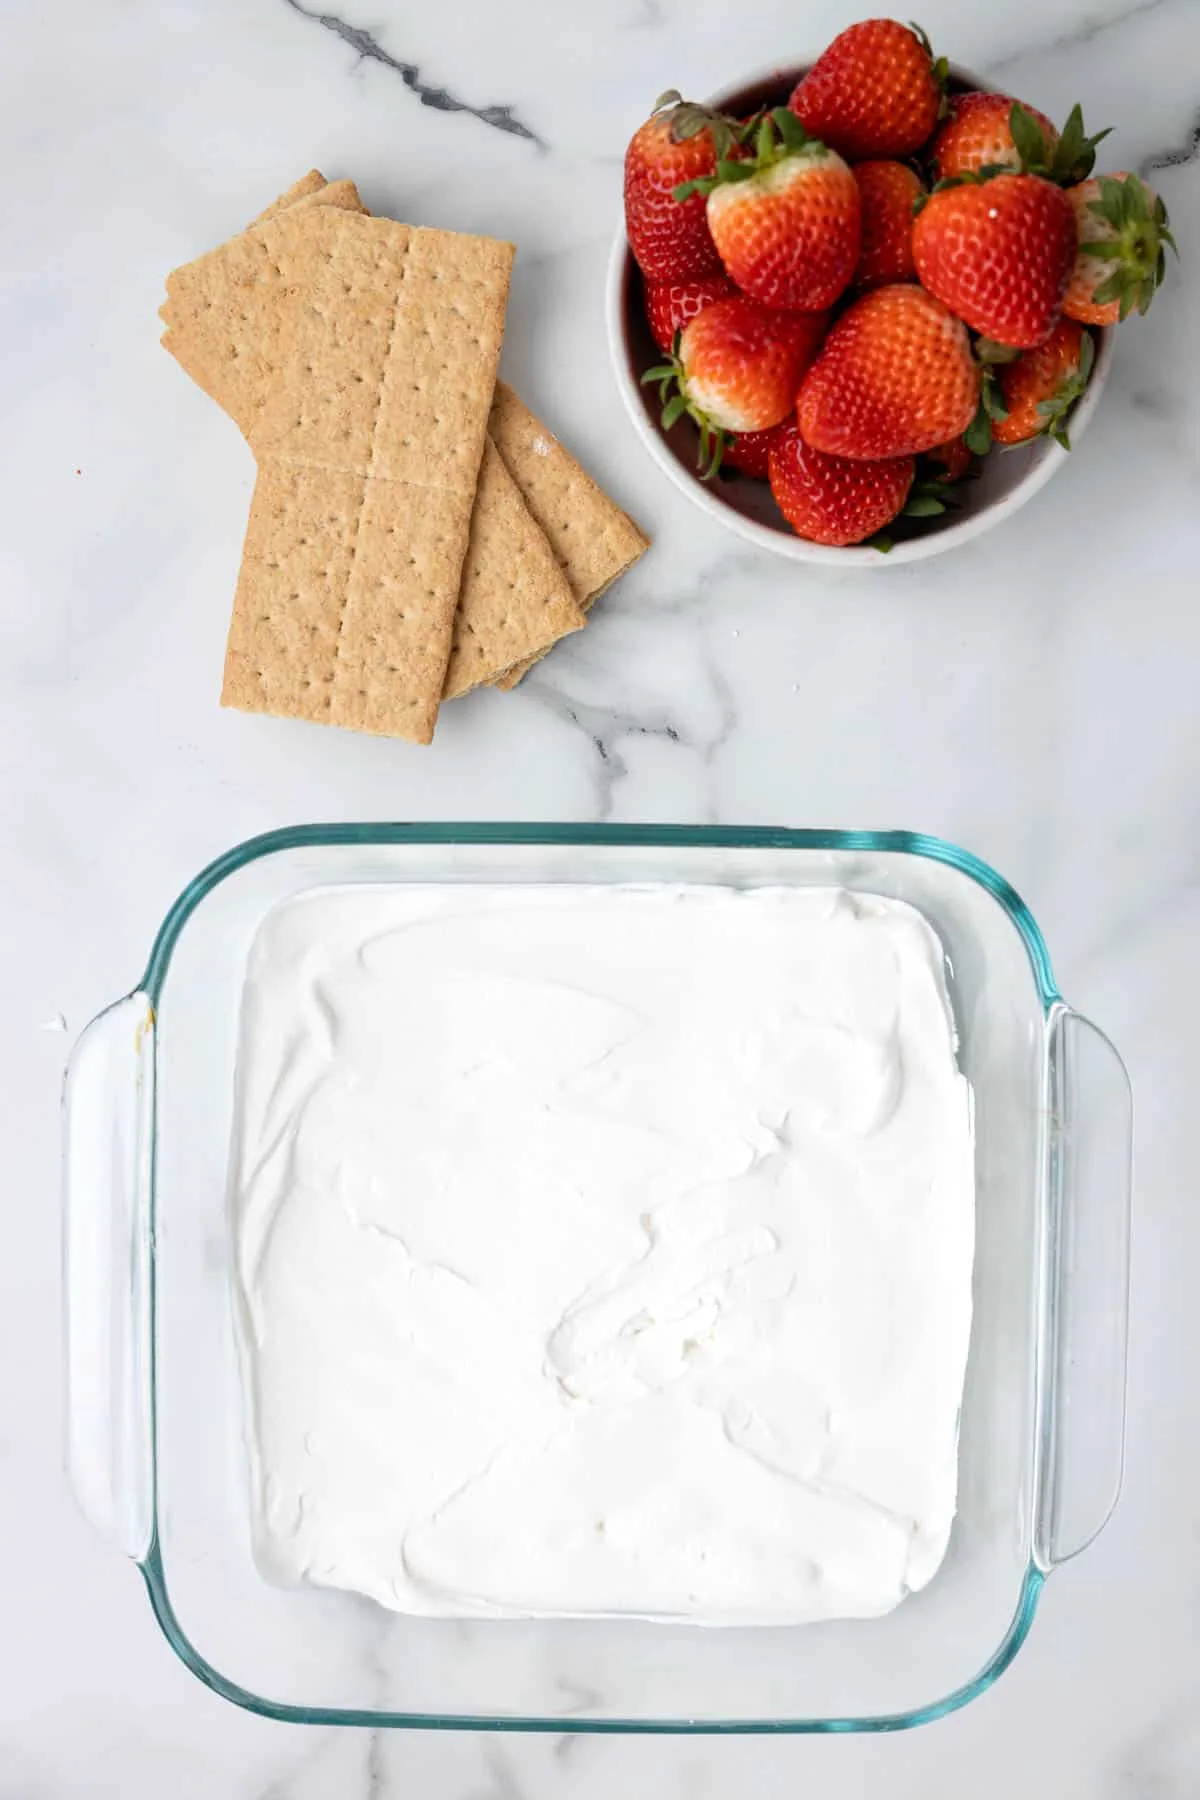 Cool whip spread in the bottom of a baking dish